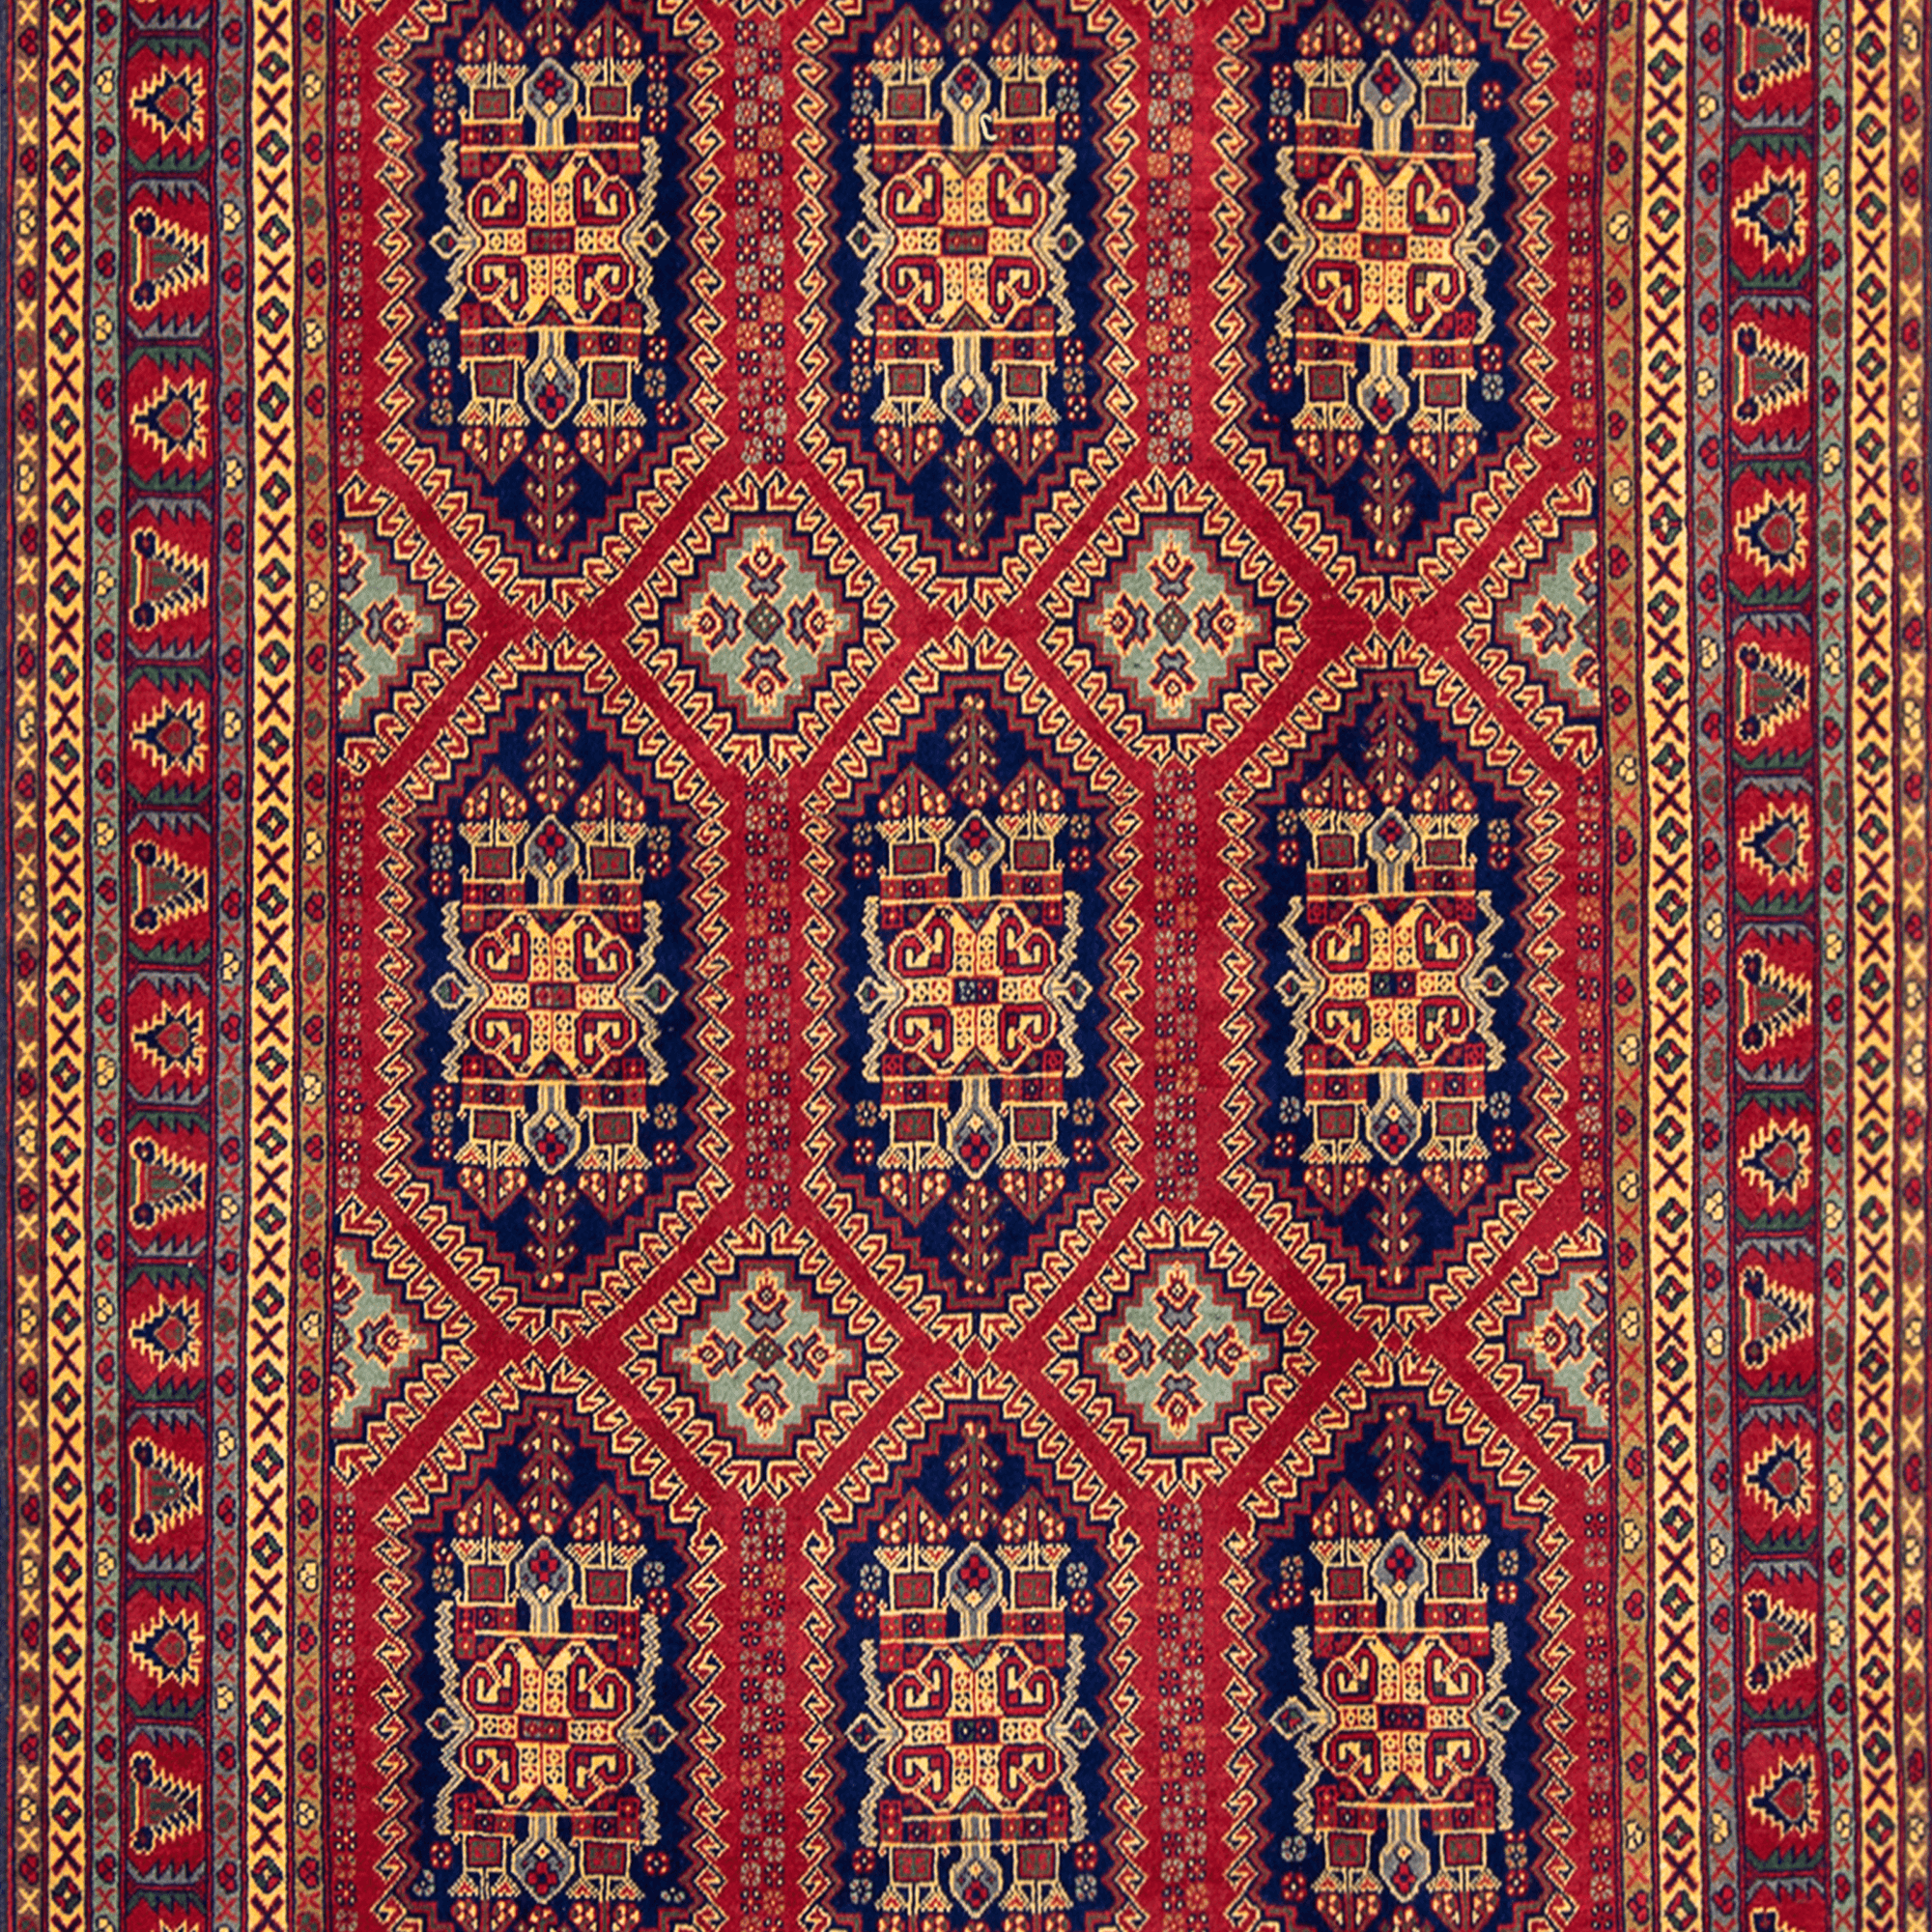 Super Fine Hand-knotted Tribal Wool Rug 150cm x 204cm